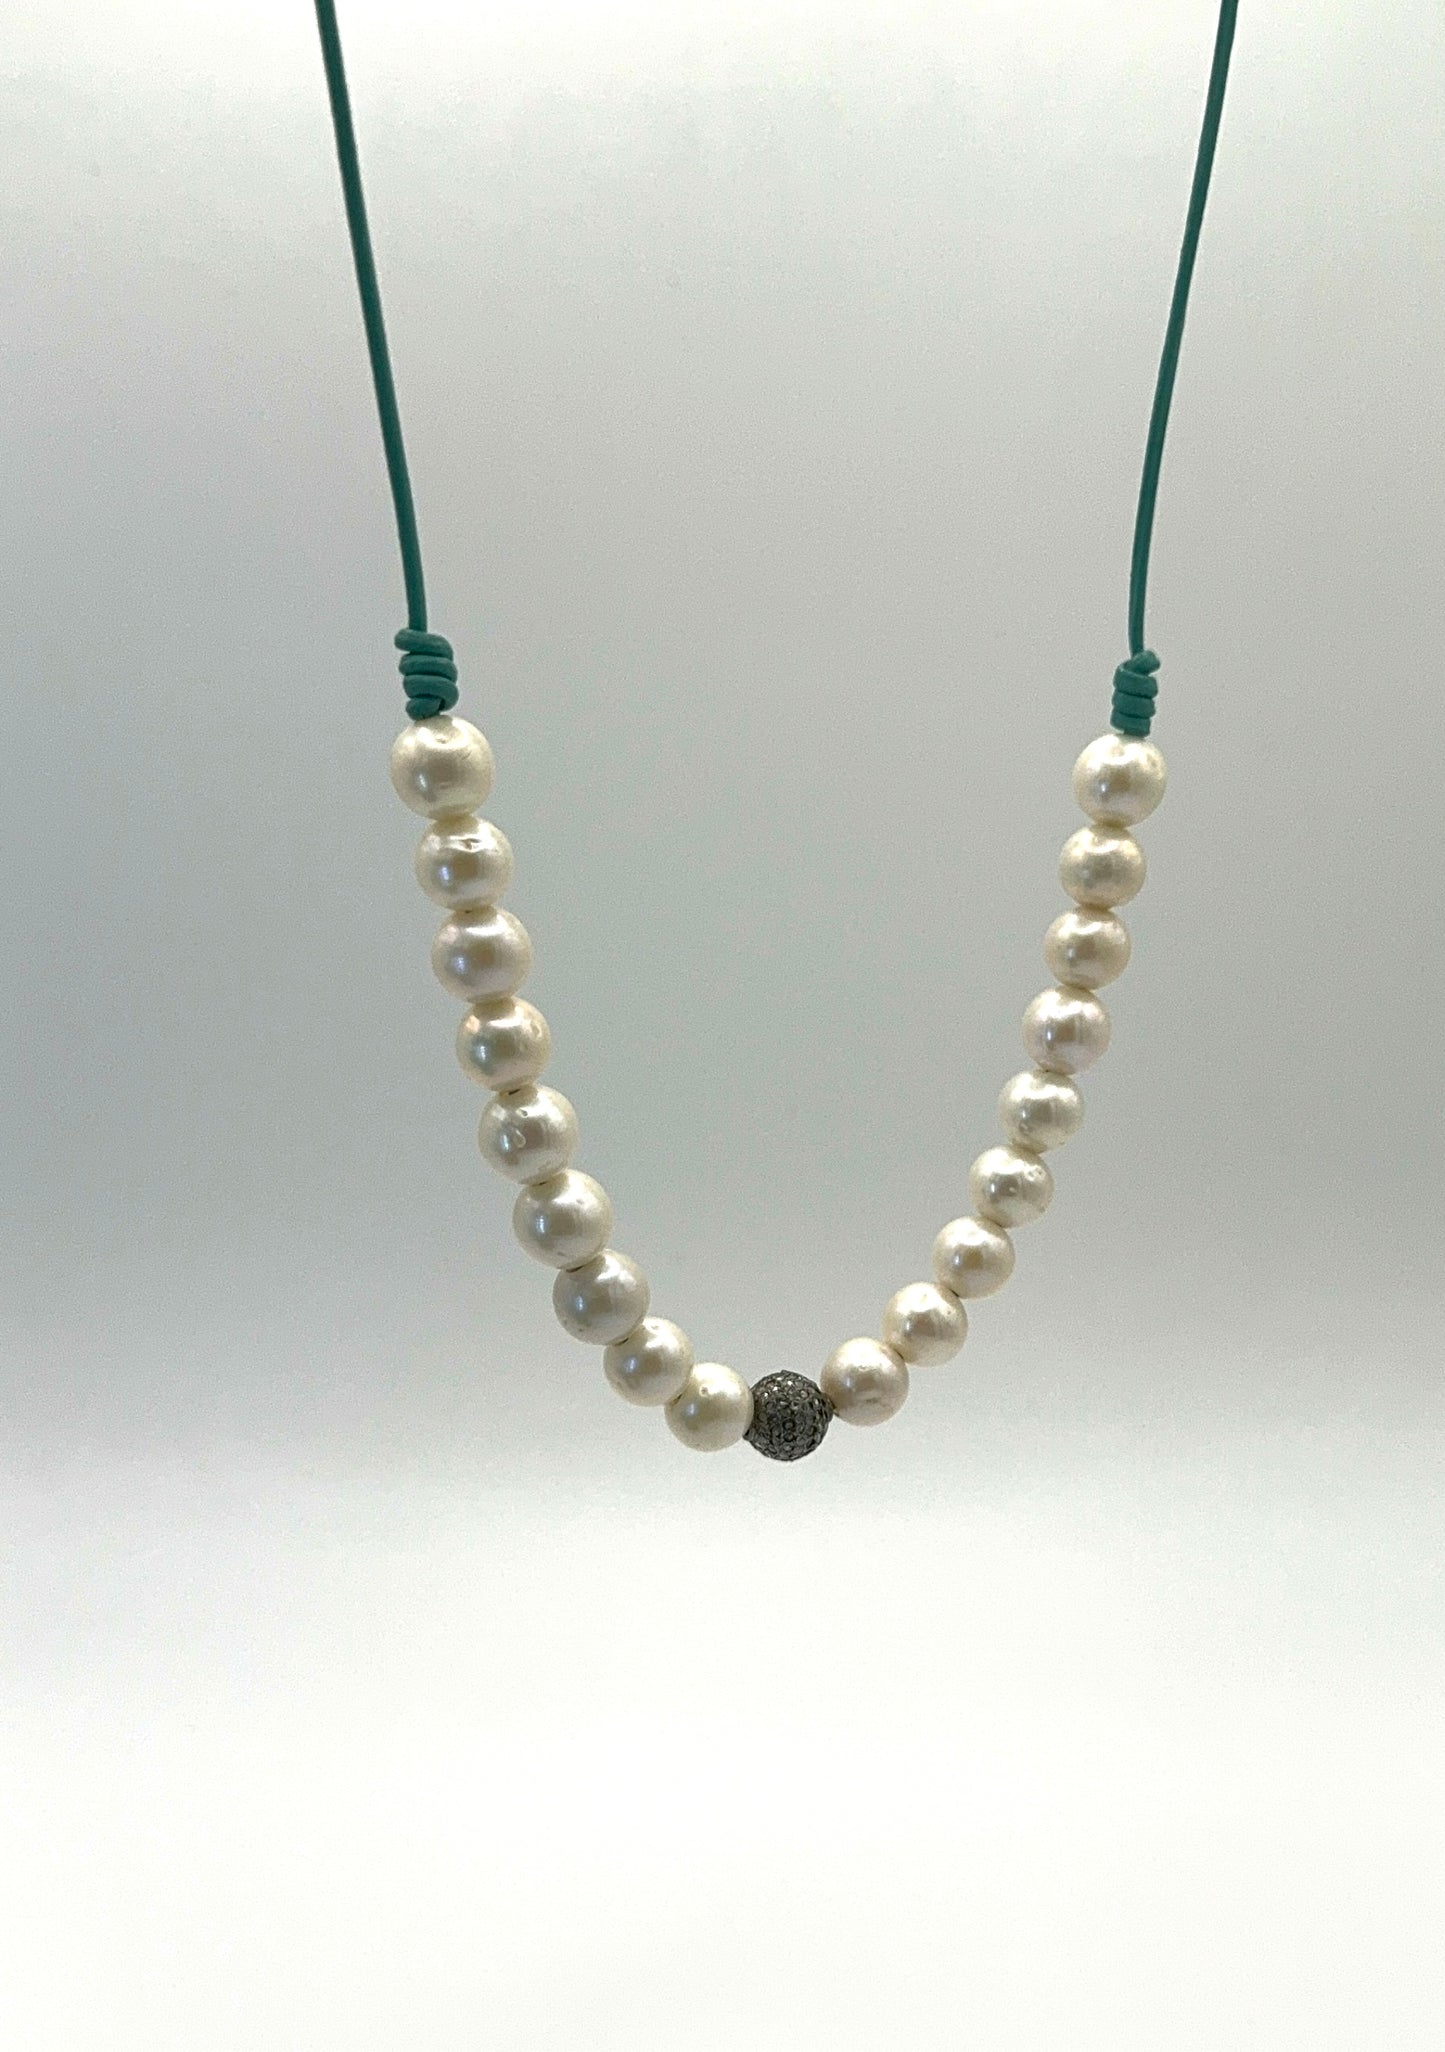 10mm White Freshwater Pearls and Diamond Bead Leather Necklace